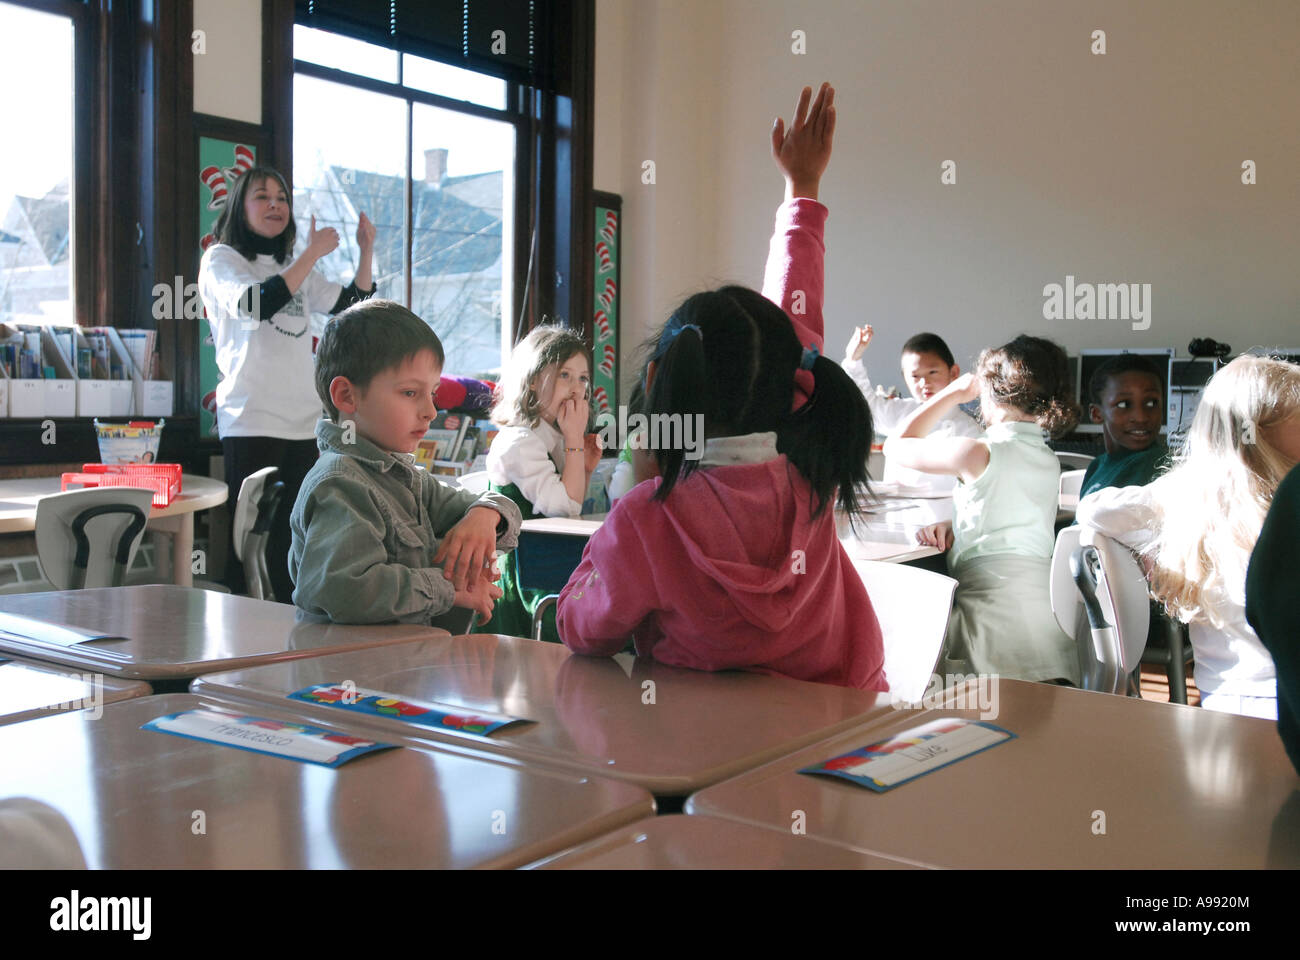 Child raising hand in classroom, New Haven Connecticut USA Stock Photo